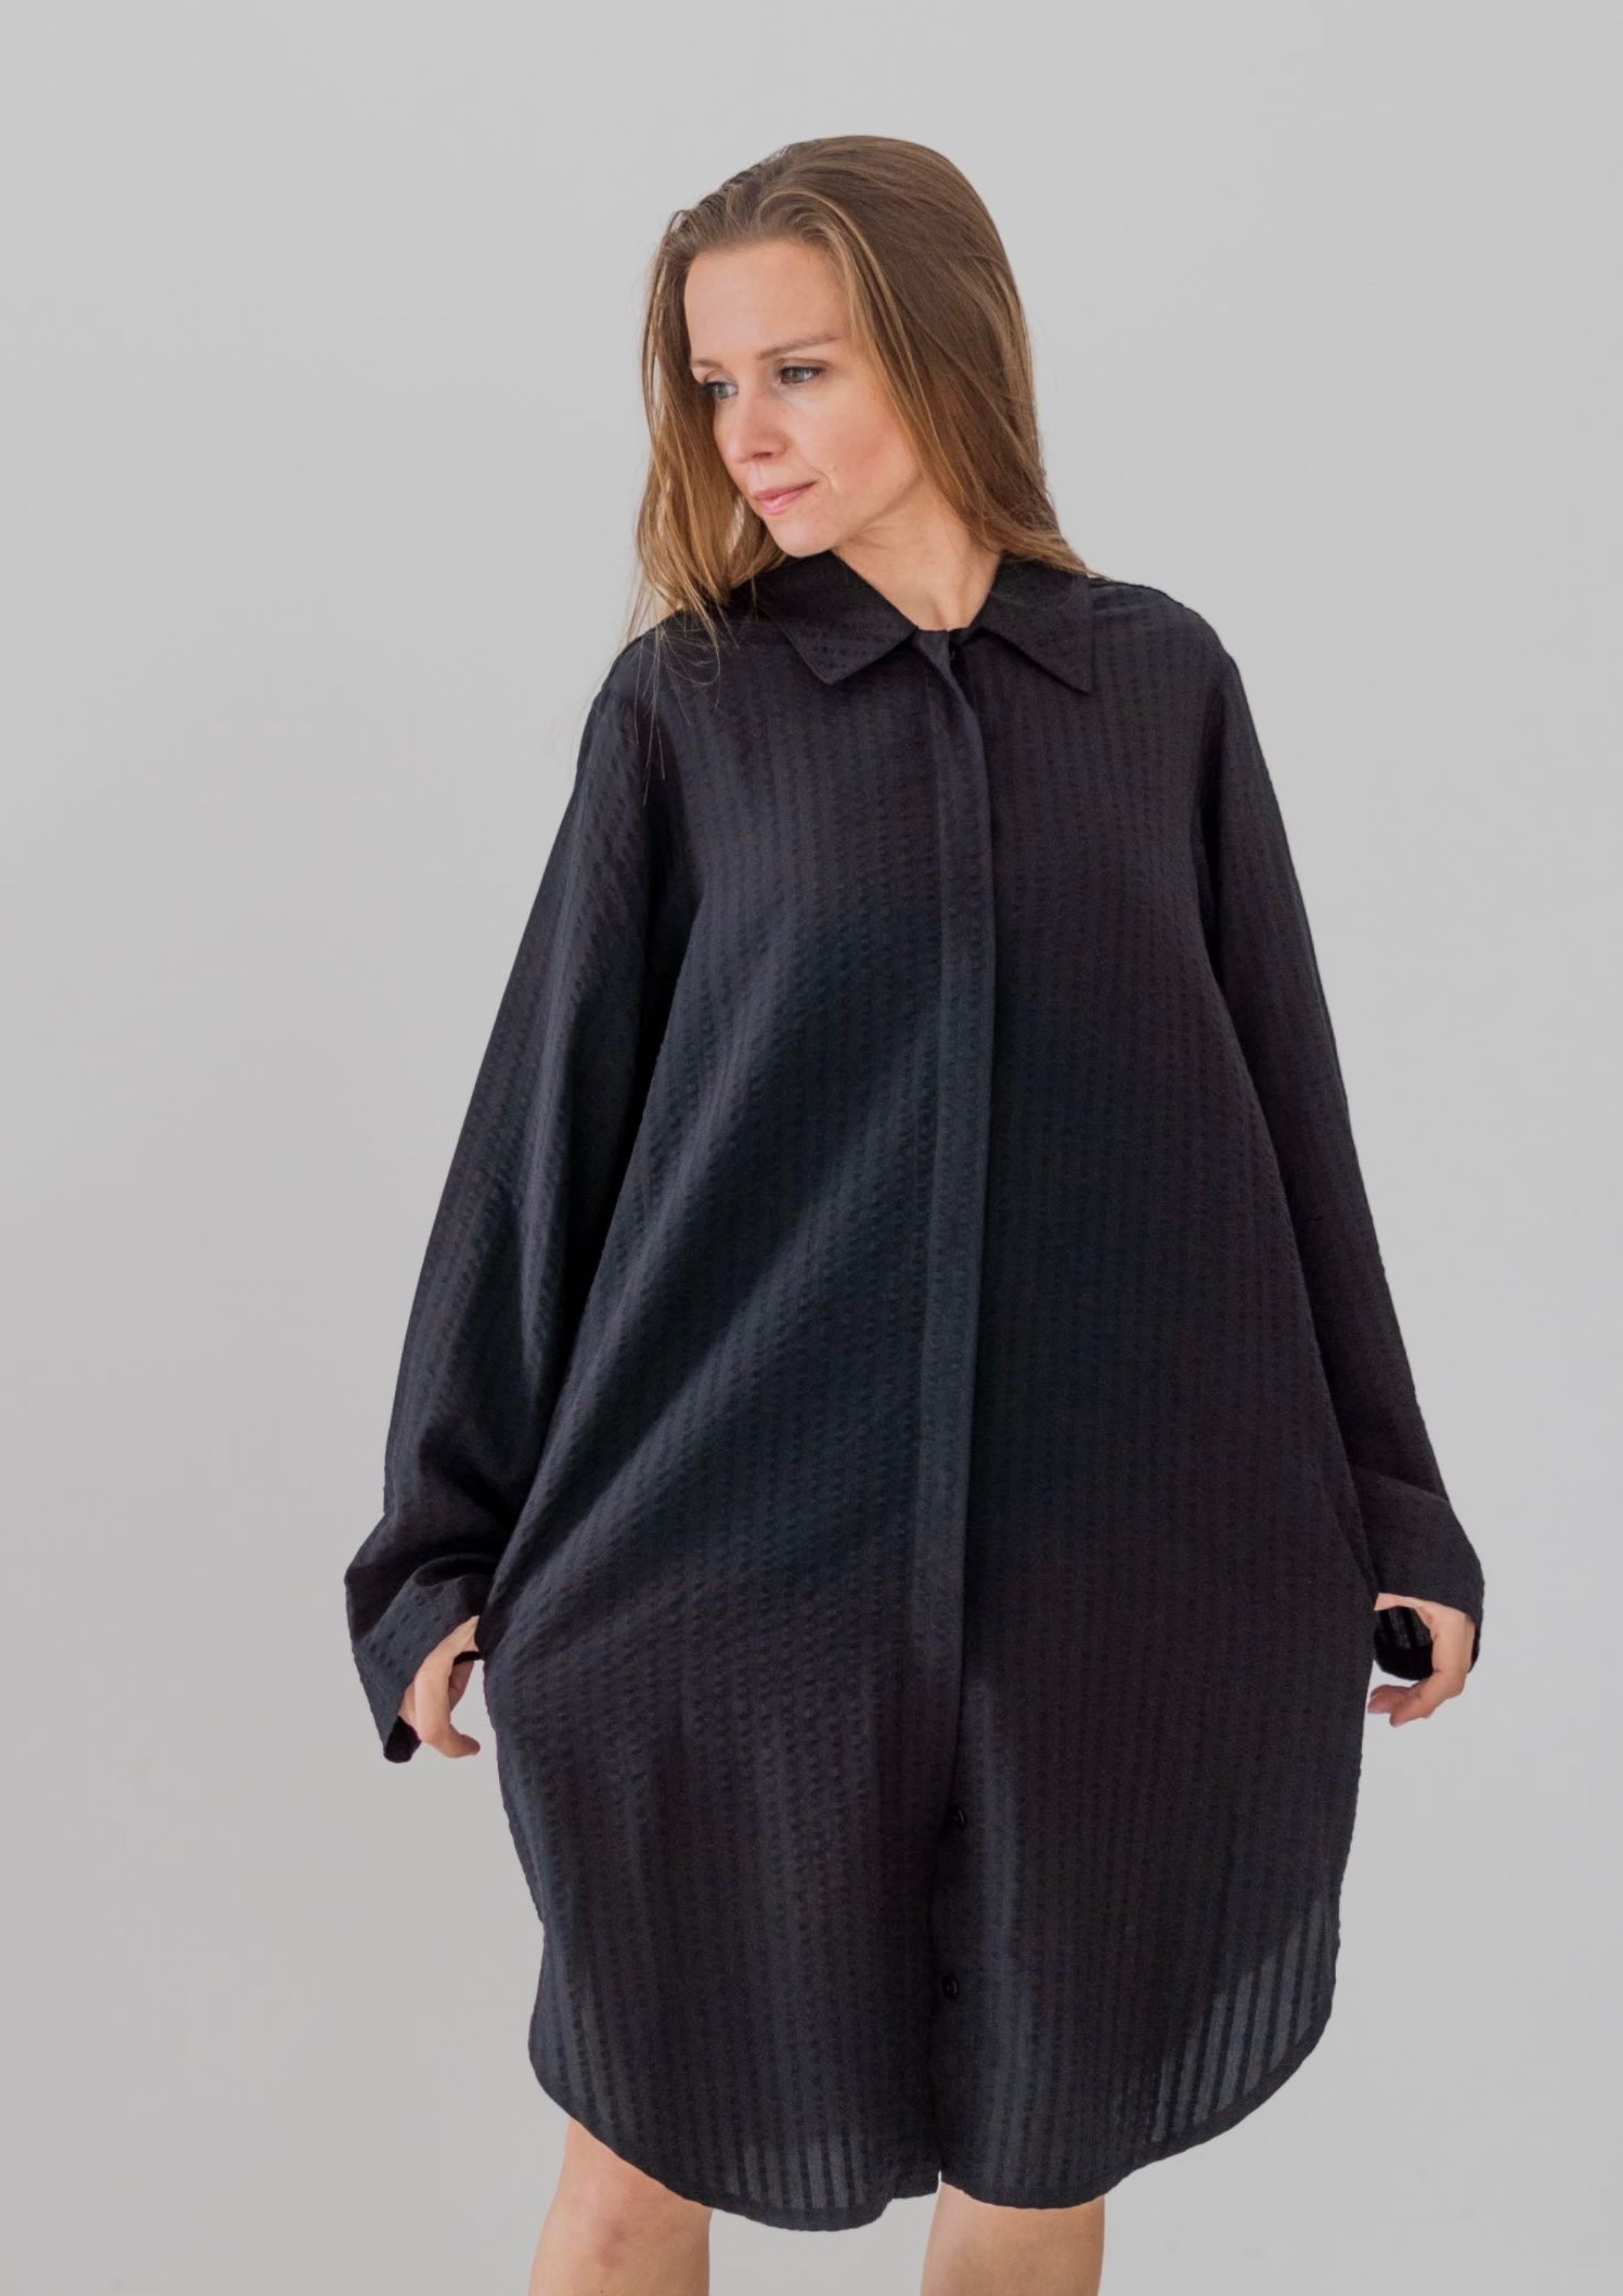 Reversible soft shirt. Can be worn as a shirt, dress or jacket. With two collars, roll-up sleeves, practical pockets and buttoned full-length opening.  100% Tencel. With recycled buttons.  In texture black.